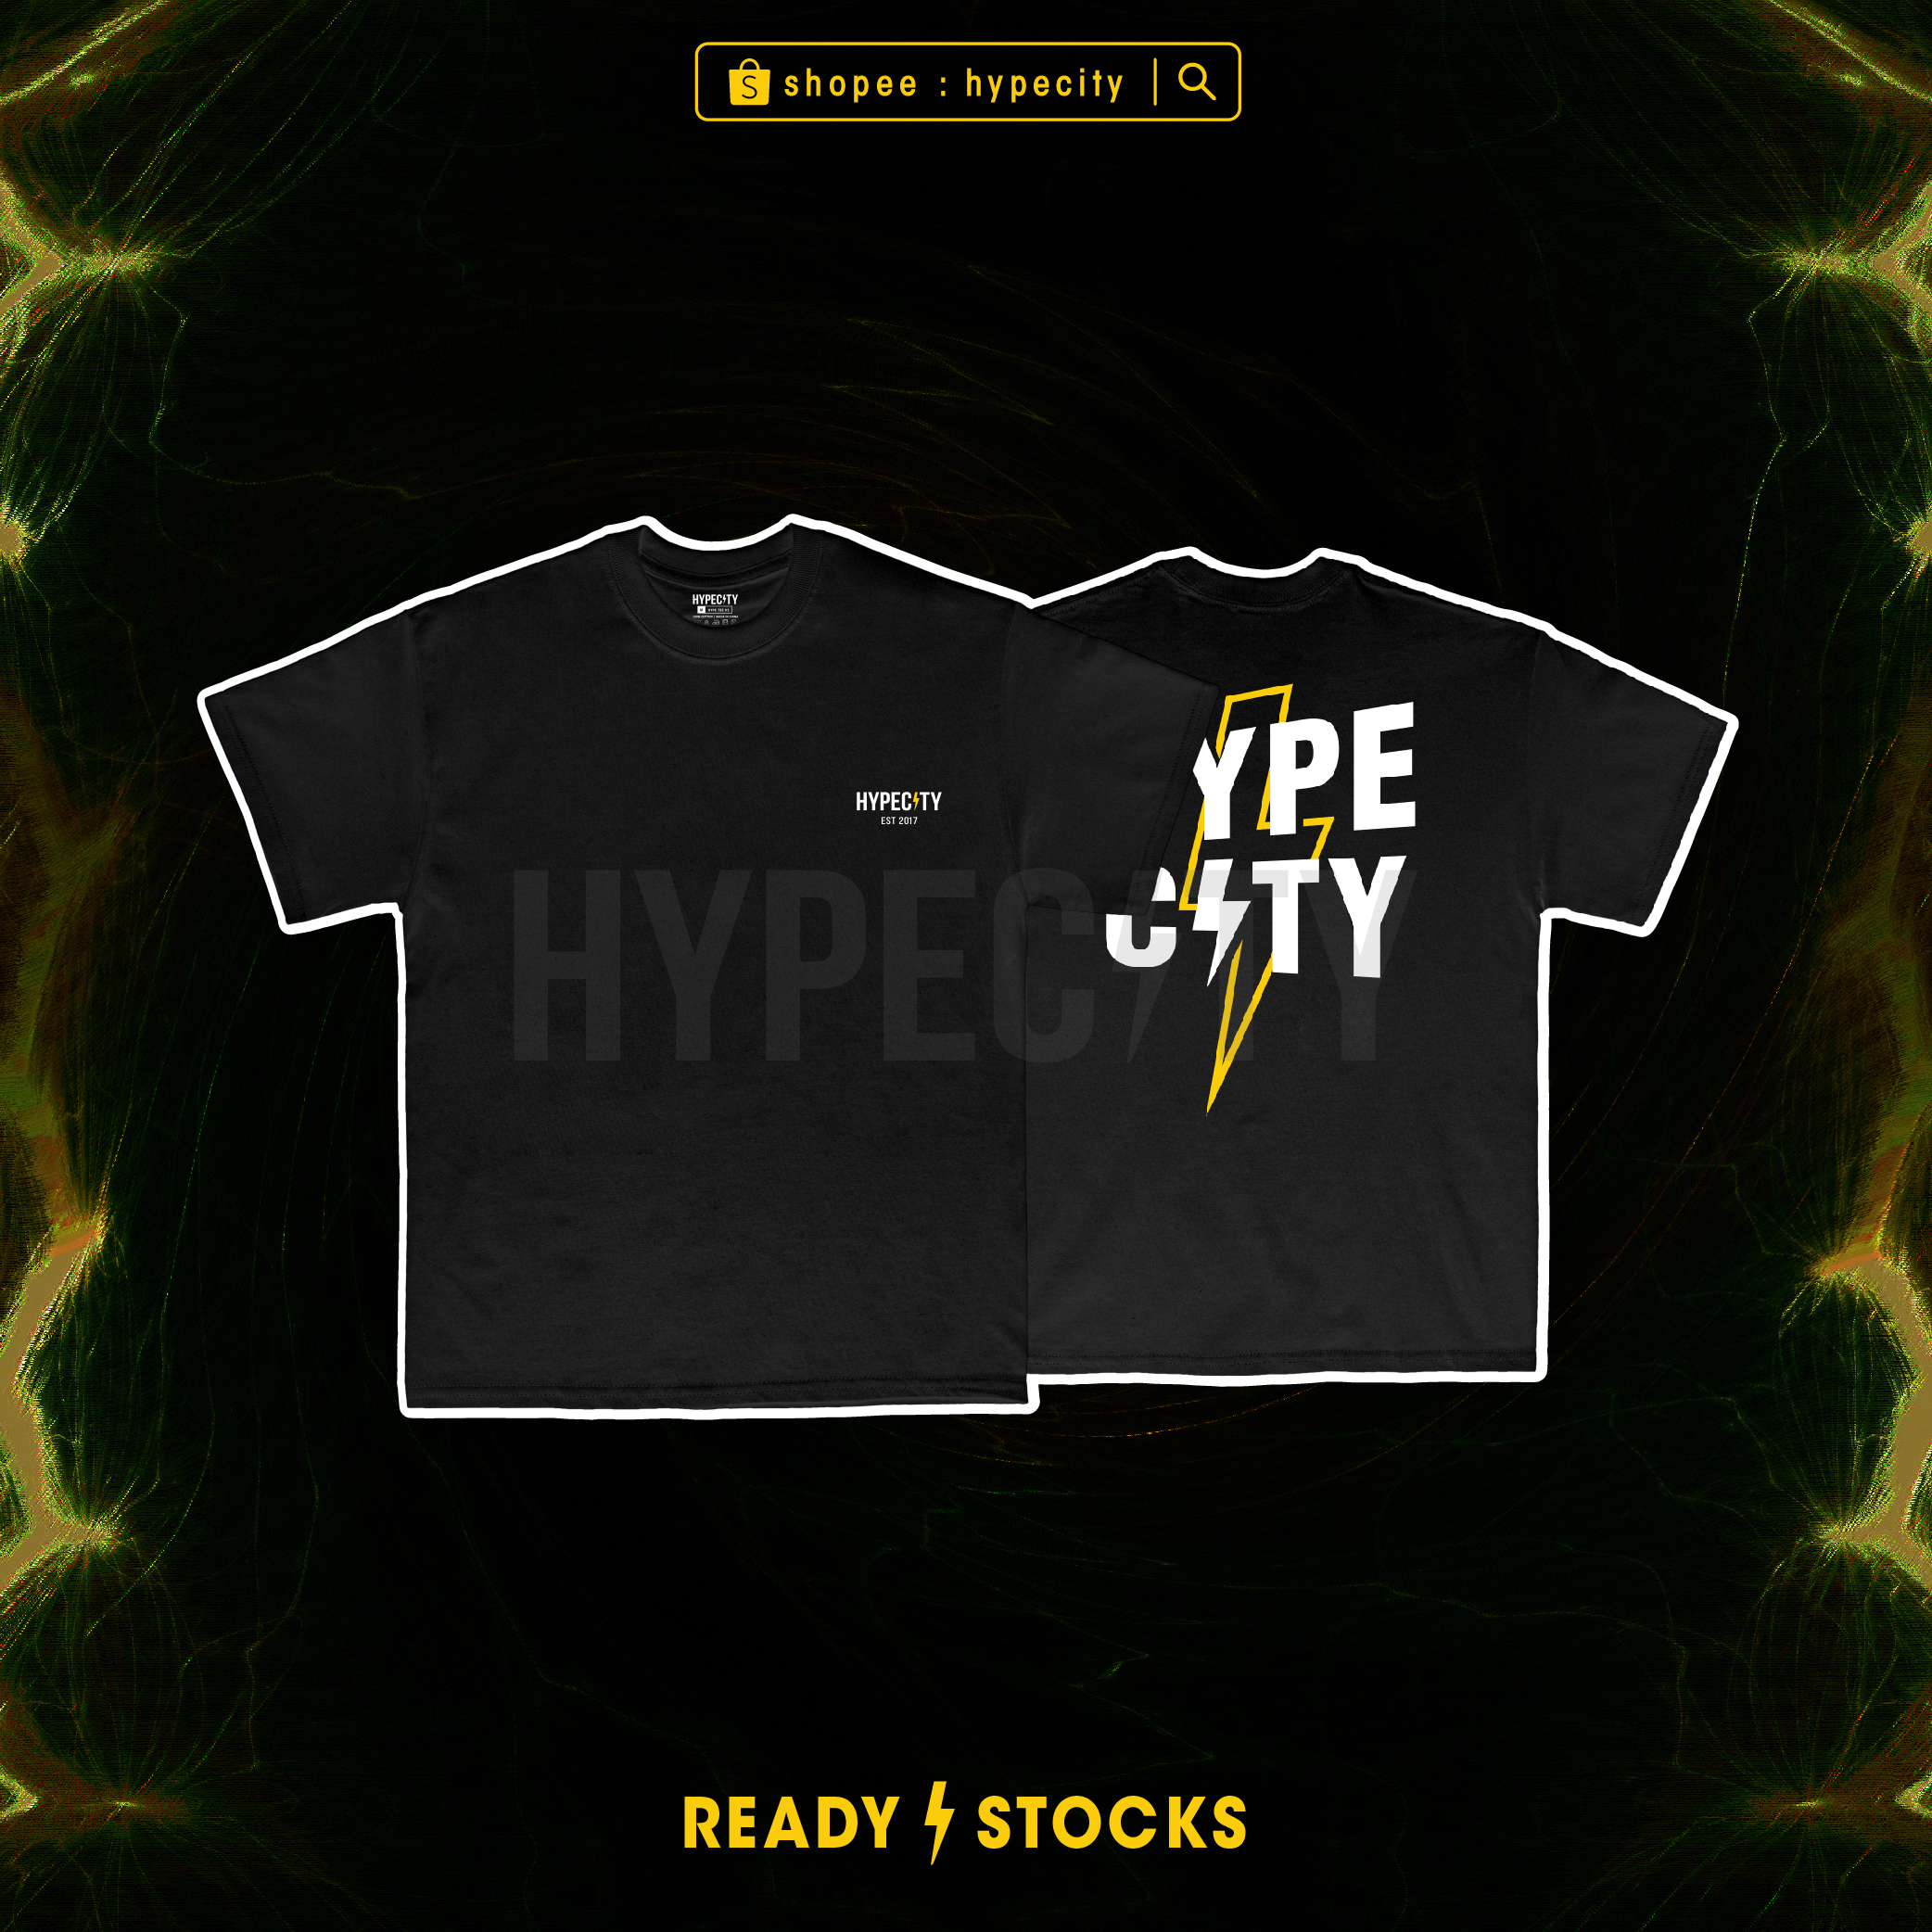 HYPECITY_Revamp_2.0_Shopee_Frame_W_Products-18-06